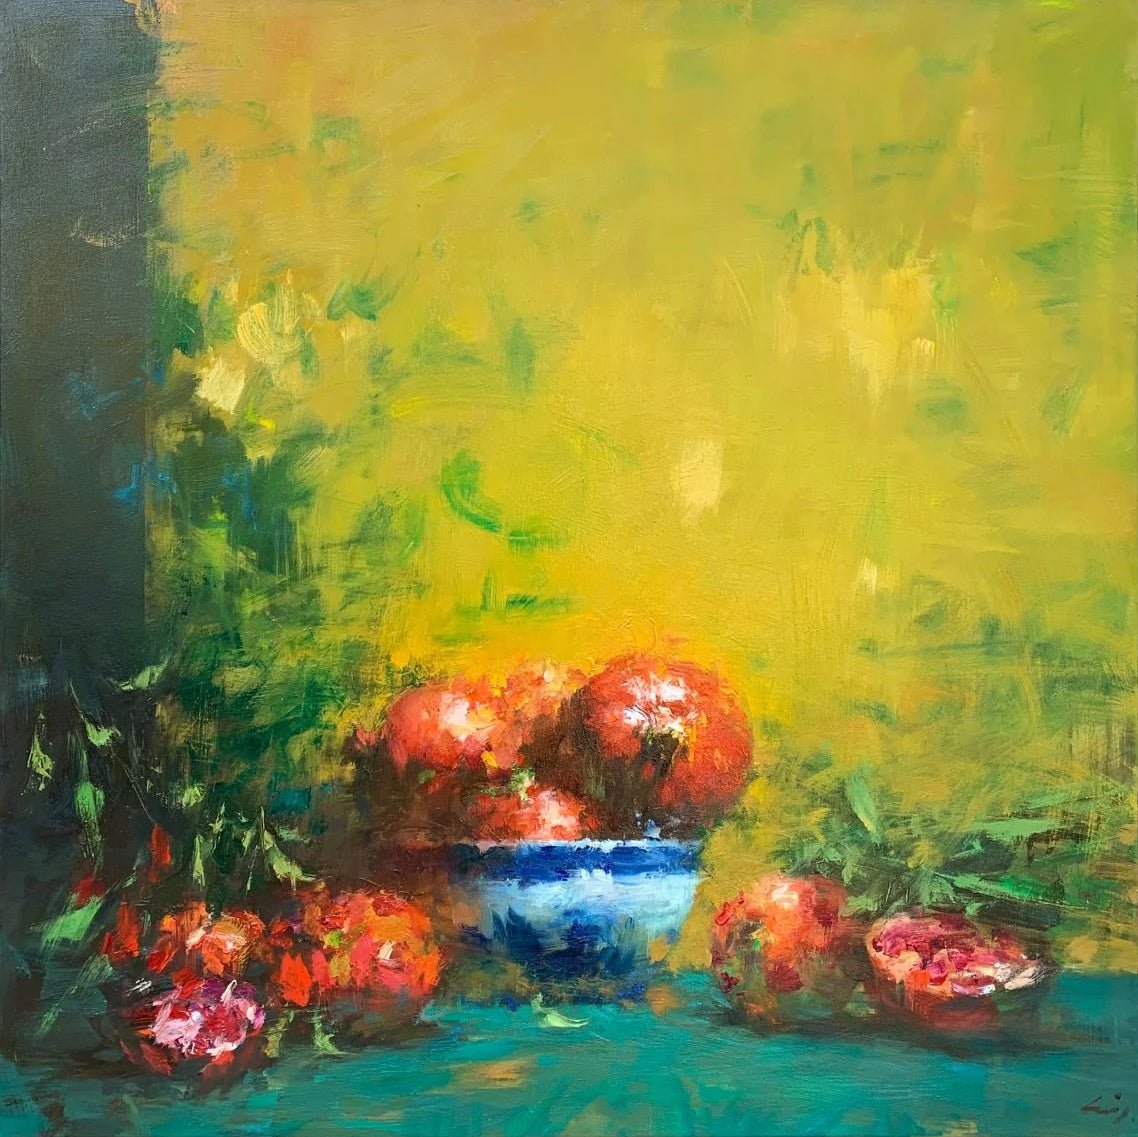 Pomegranates in Chinese Bowl by Ning Lee at LePrince Galleries